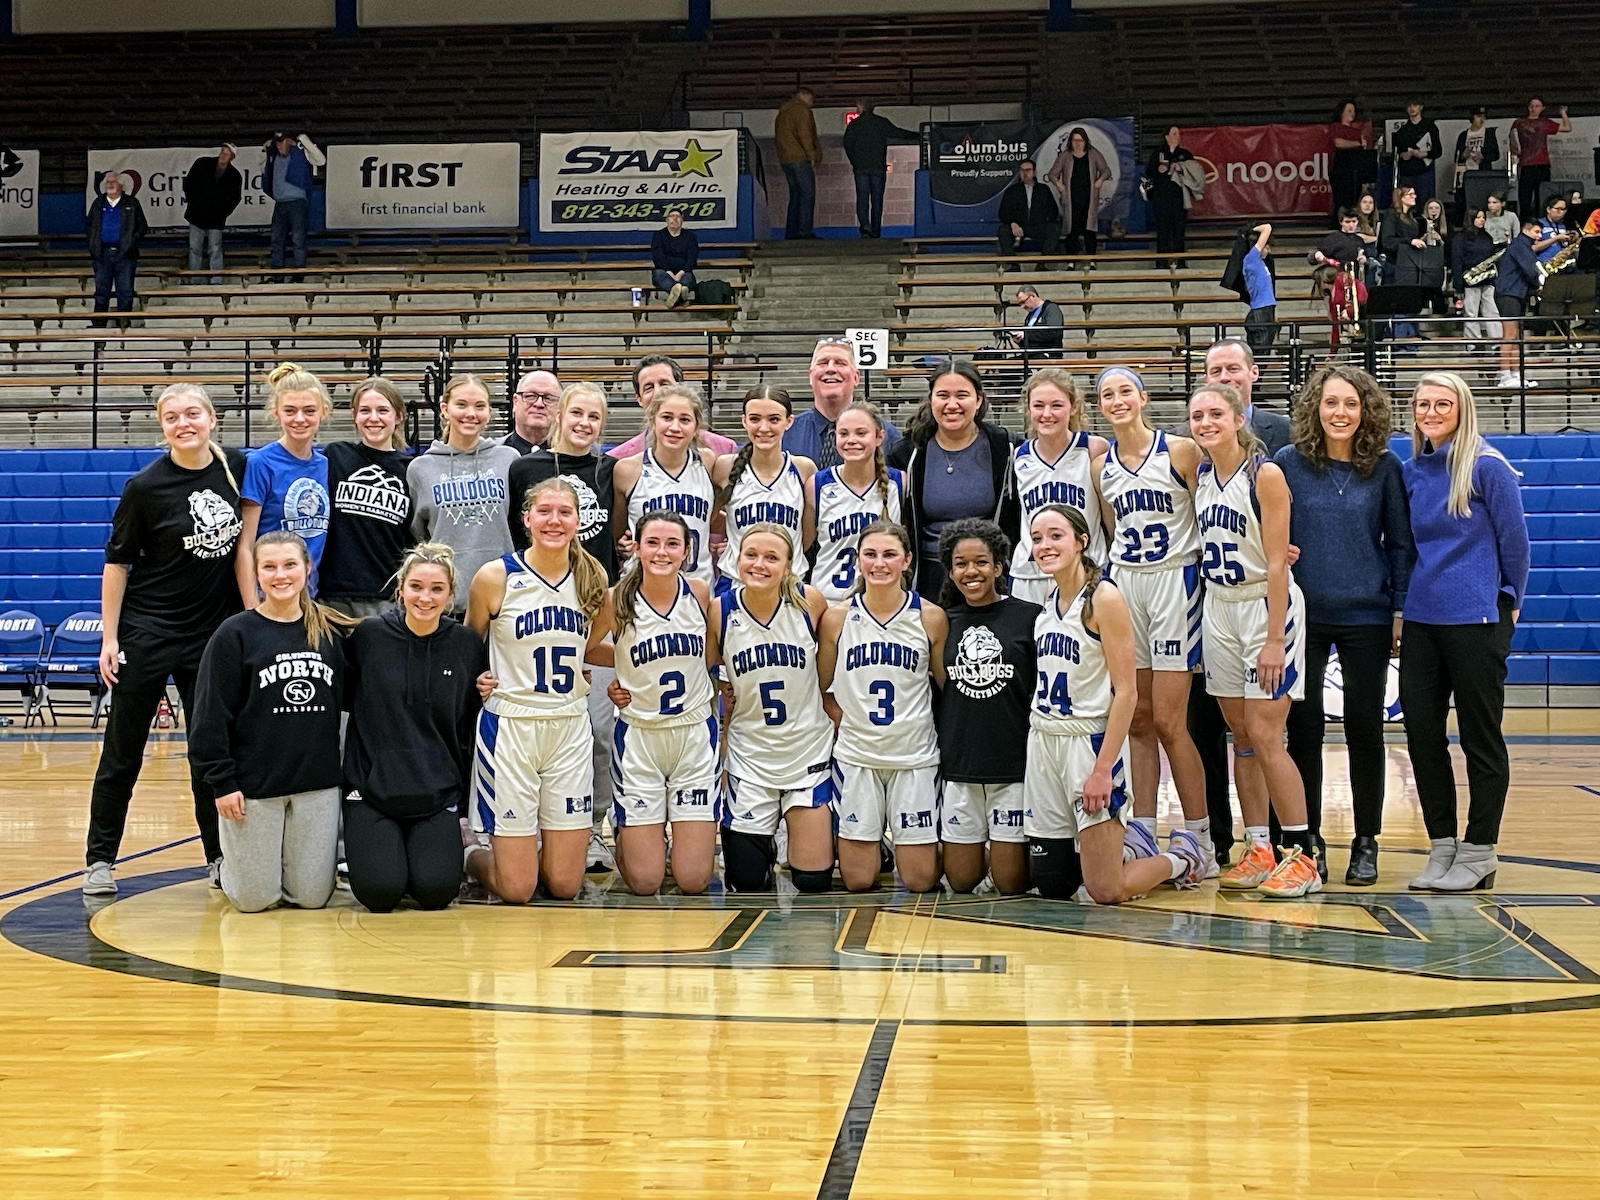 Fourth quarter rally earns Bull Dogs an undefeated conference title in girls basketball cover photo